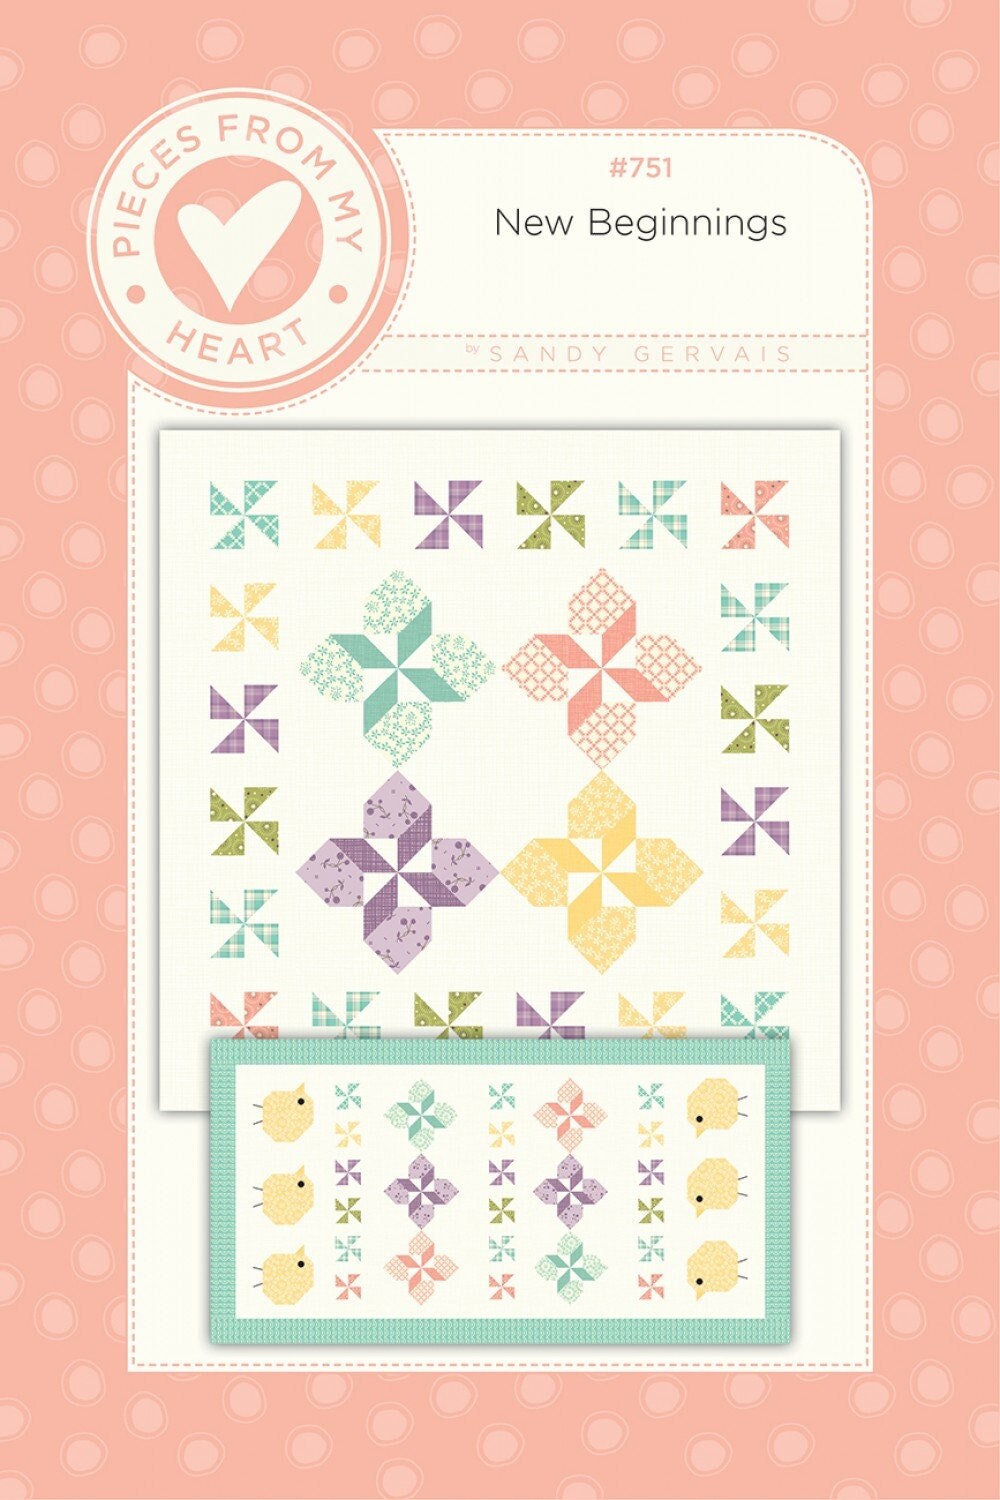 LAST CALL New Beginnings Table Quilt Pattern, Pieces From My Heart PM751, Spring Chicks Pinwheels Table Runner Topper, Sandy Gervais